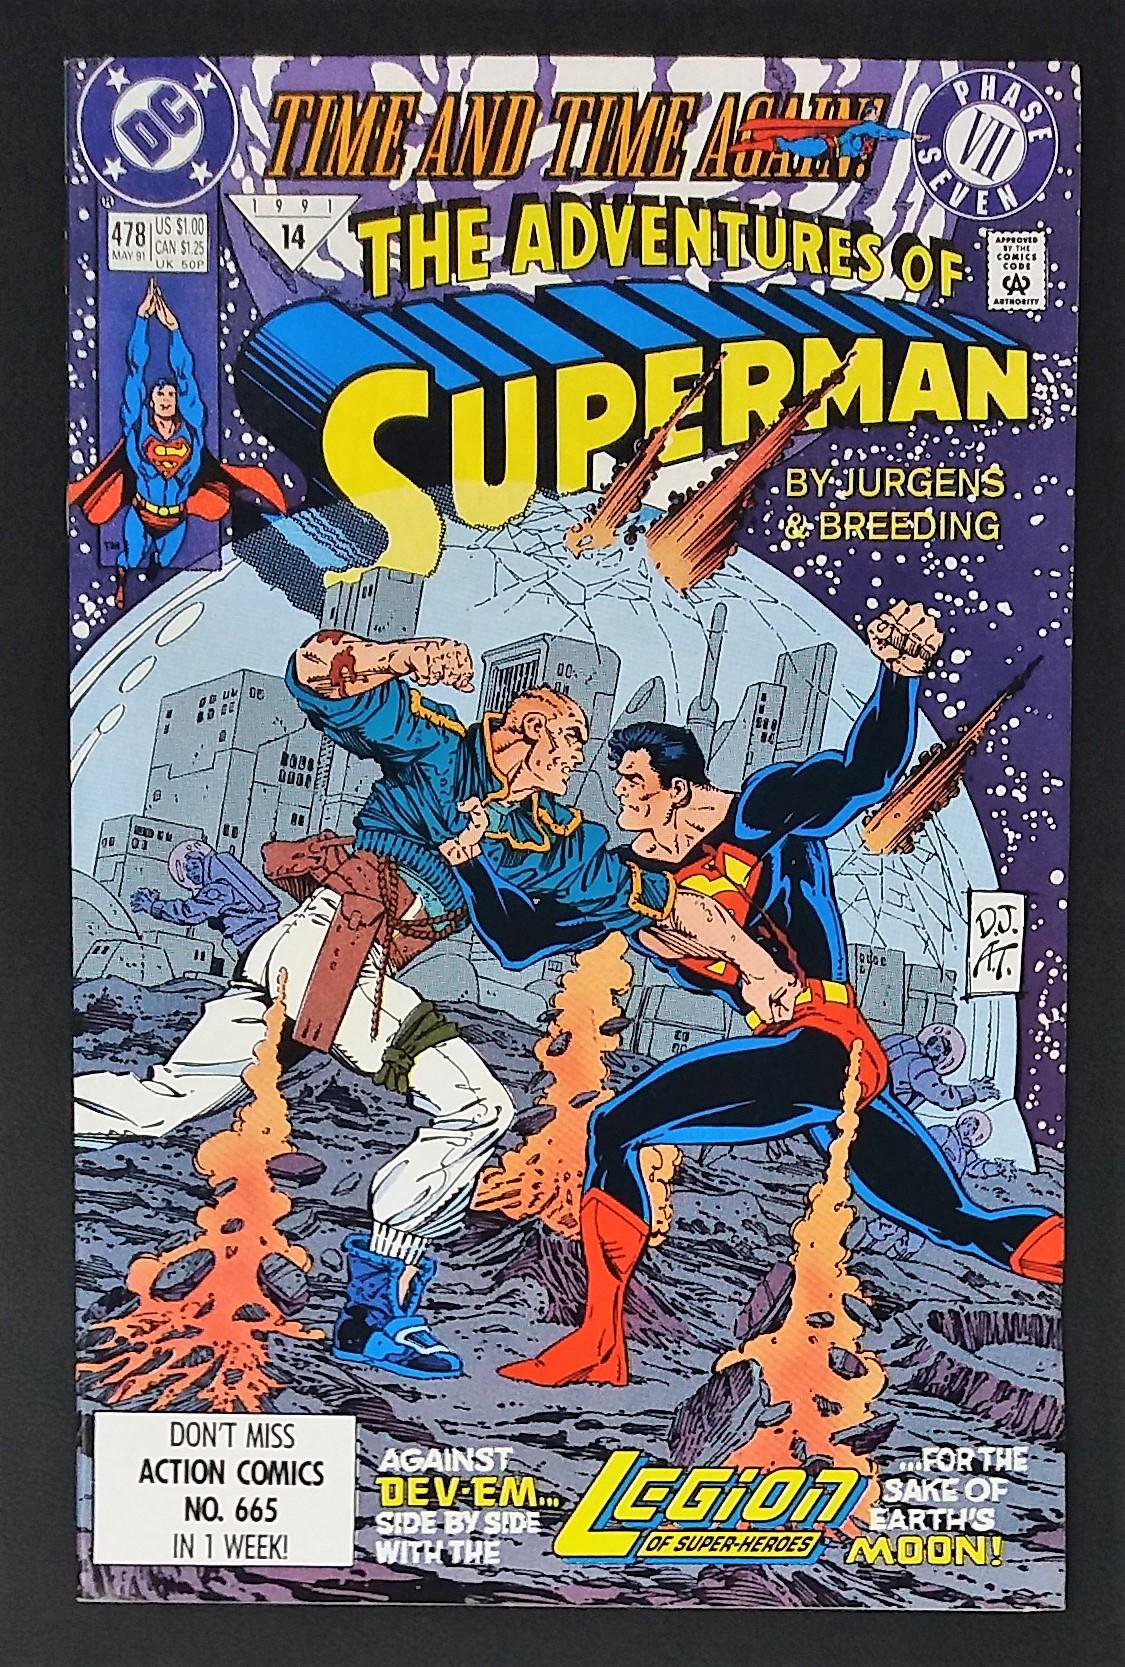 The Adventures of Superman #478